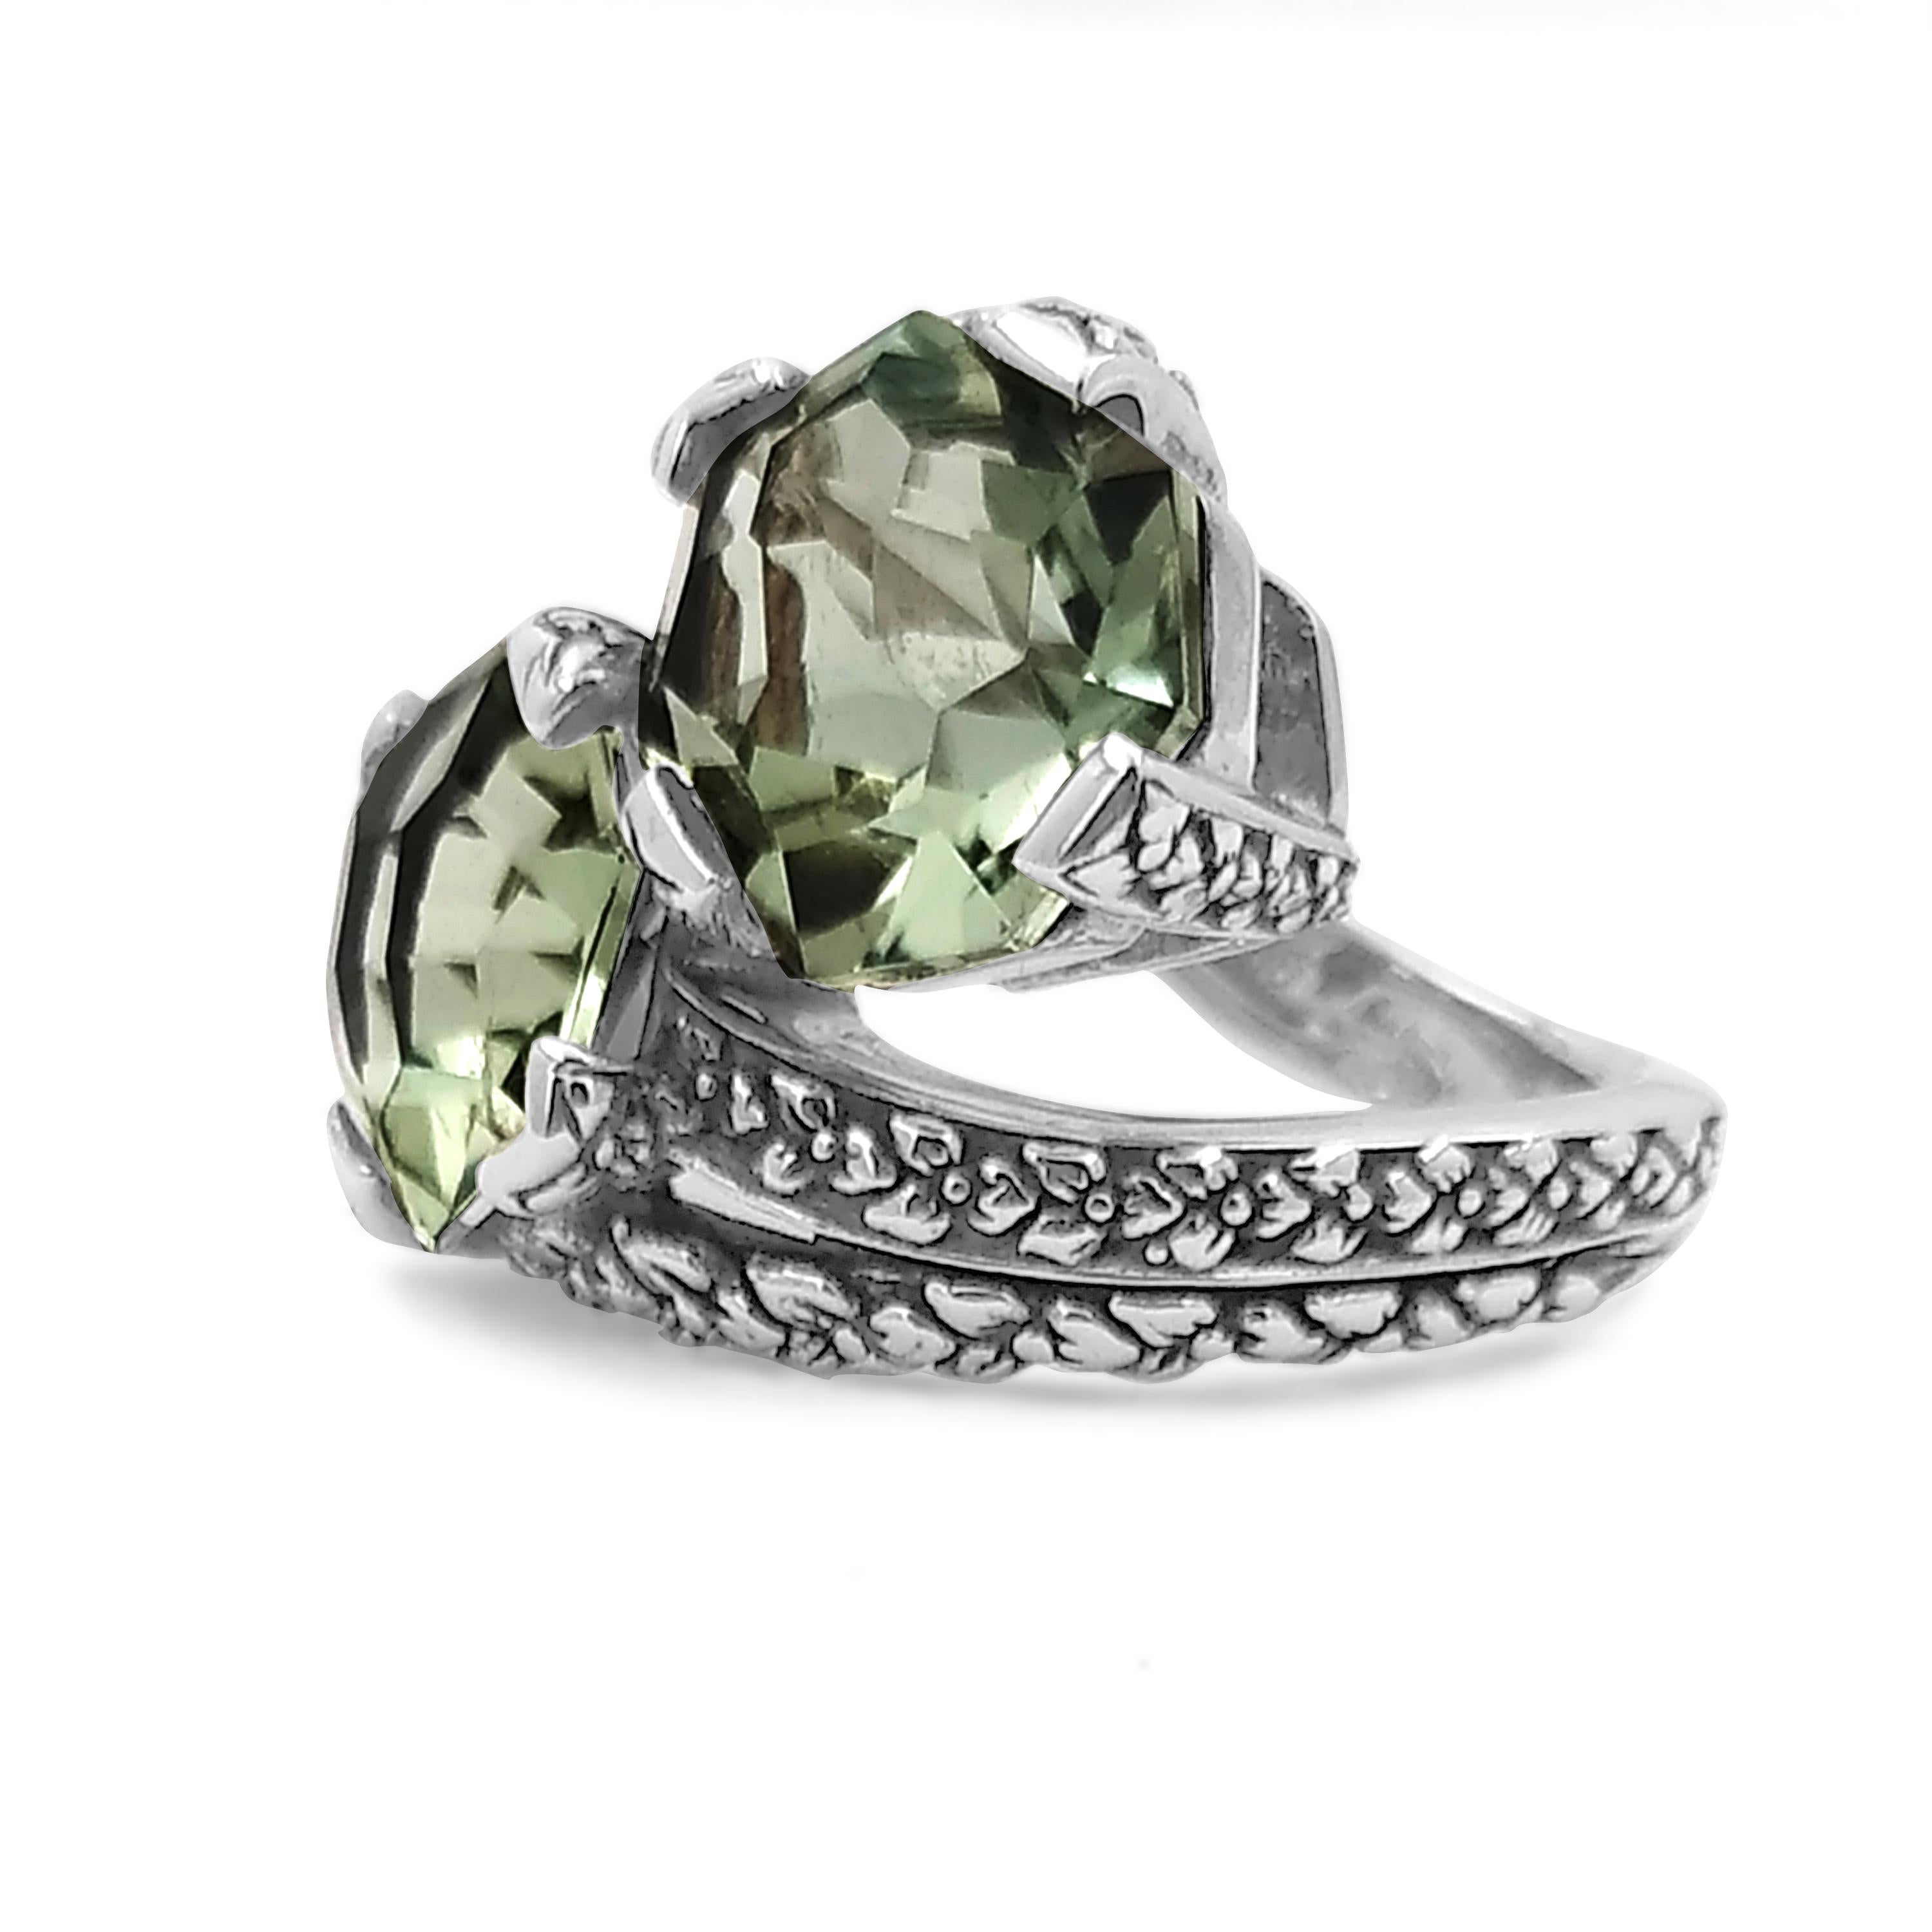 Double Stone Green Amethyst Ring with Engraved Sterling Silver

The Galactical collection is a supersonic take on modern, faceted gemstones. A new adventure of artistry was visualized to create the sharp strategic angles that Stephen has introduced.